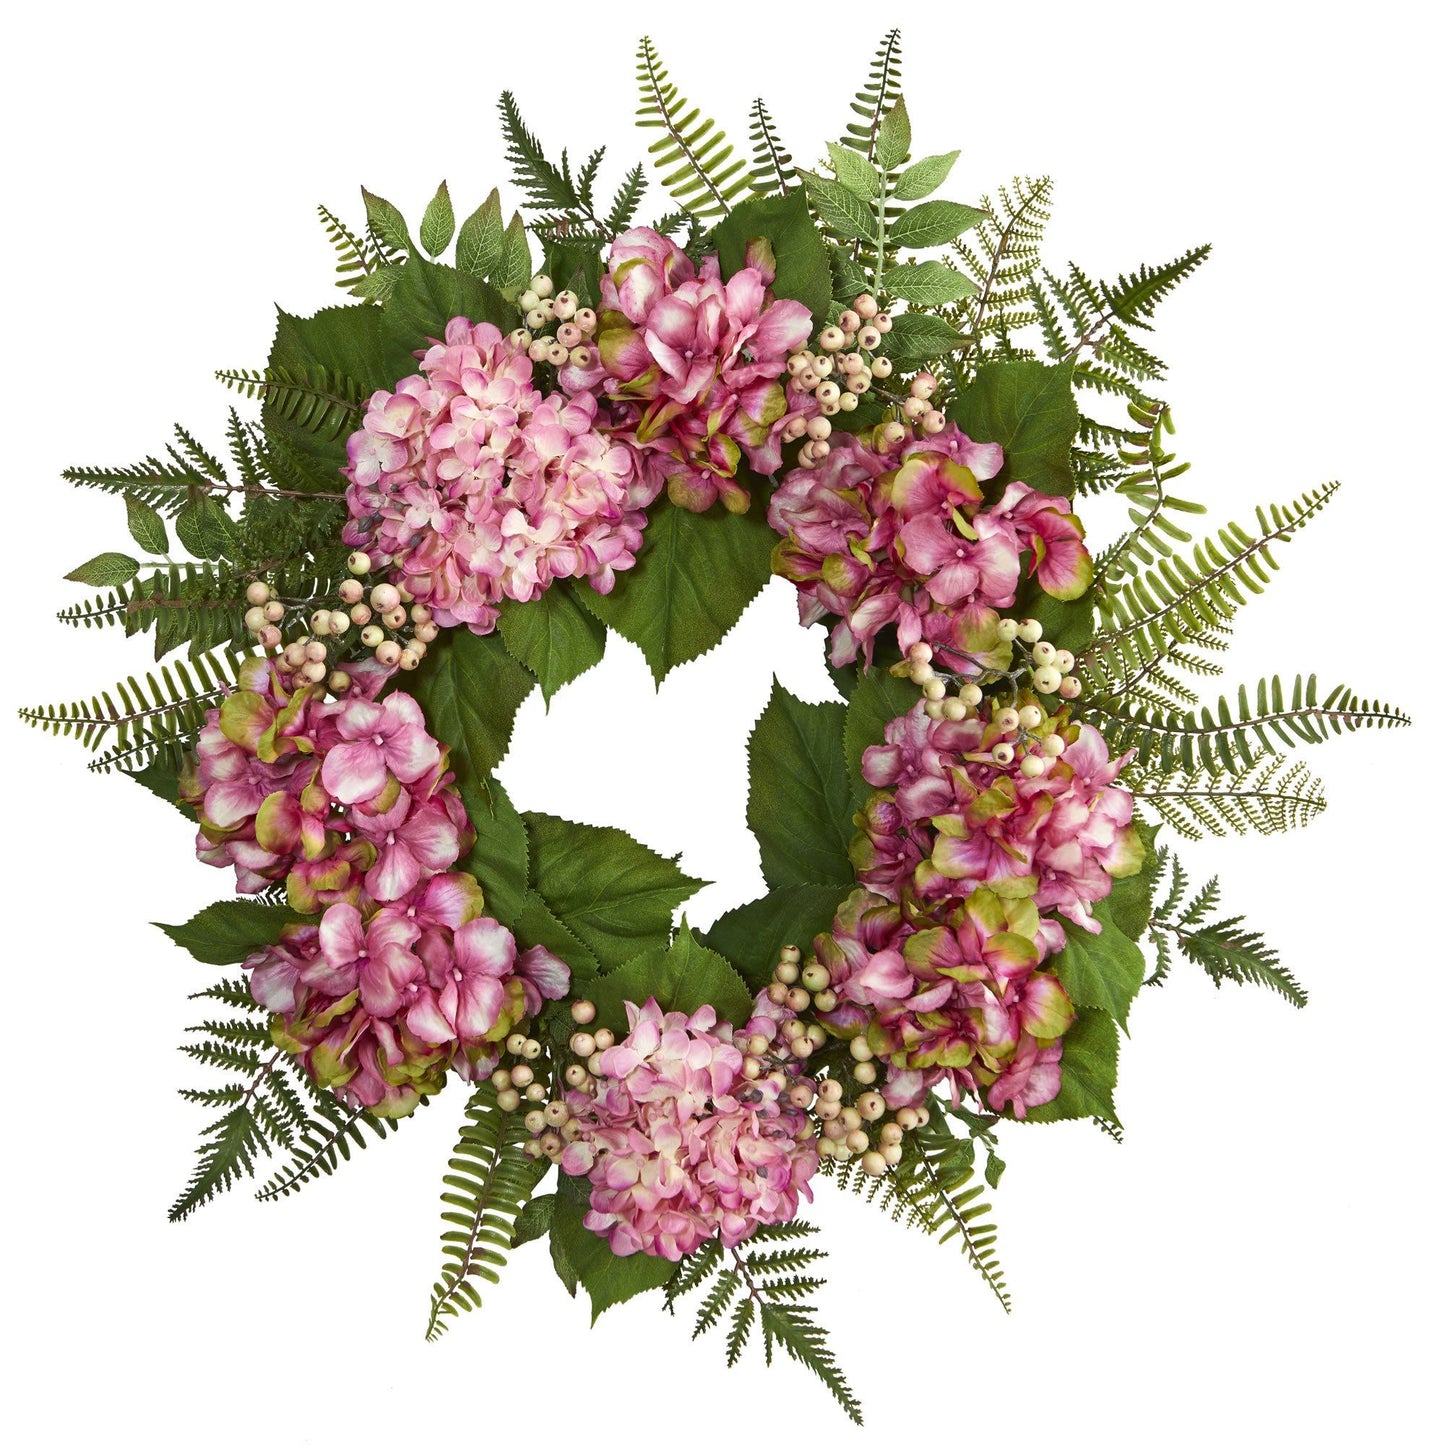 24” Artificial Hydrangea Berry Wreath by Nearly Natural